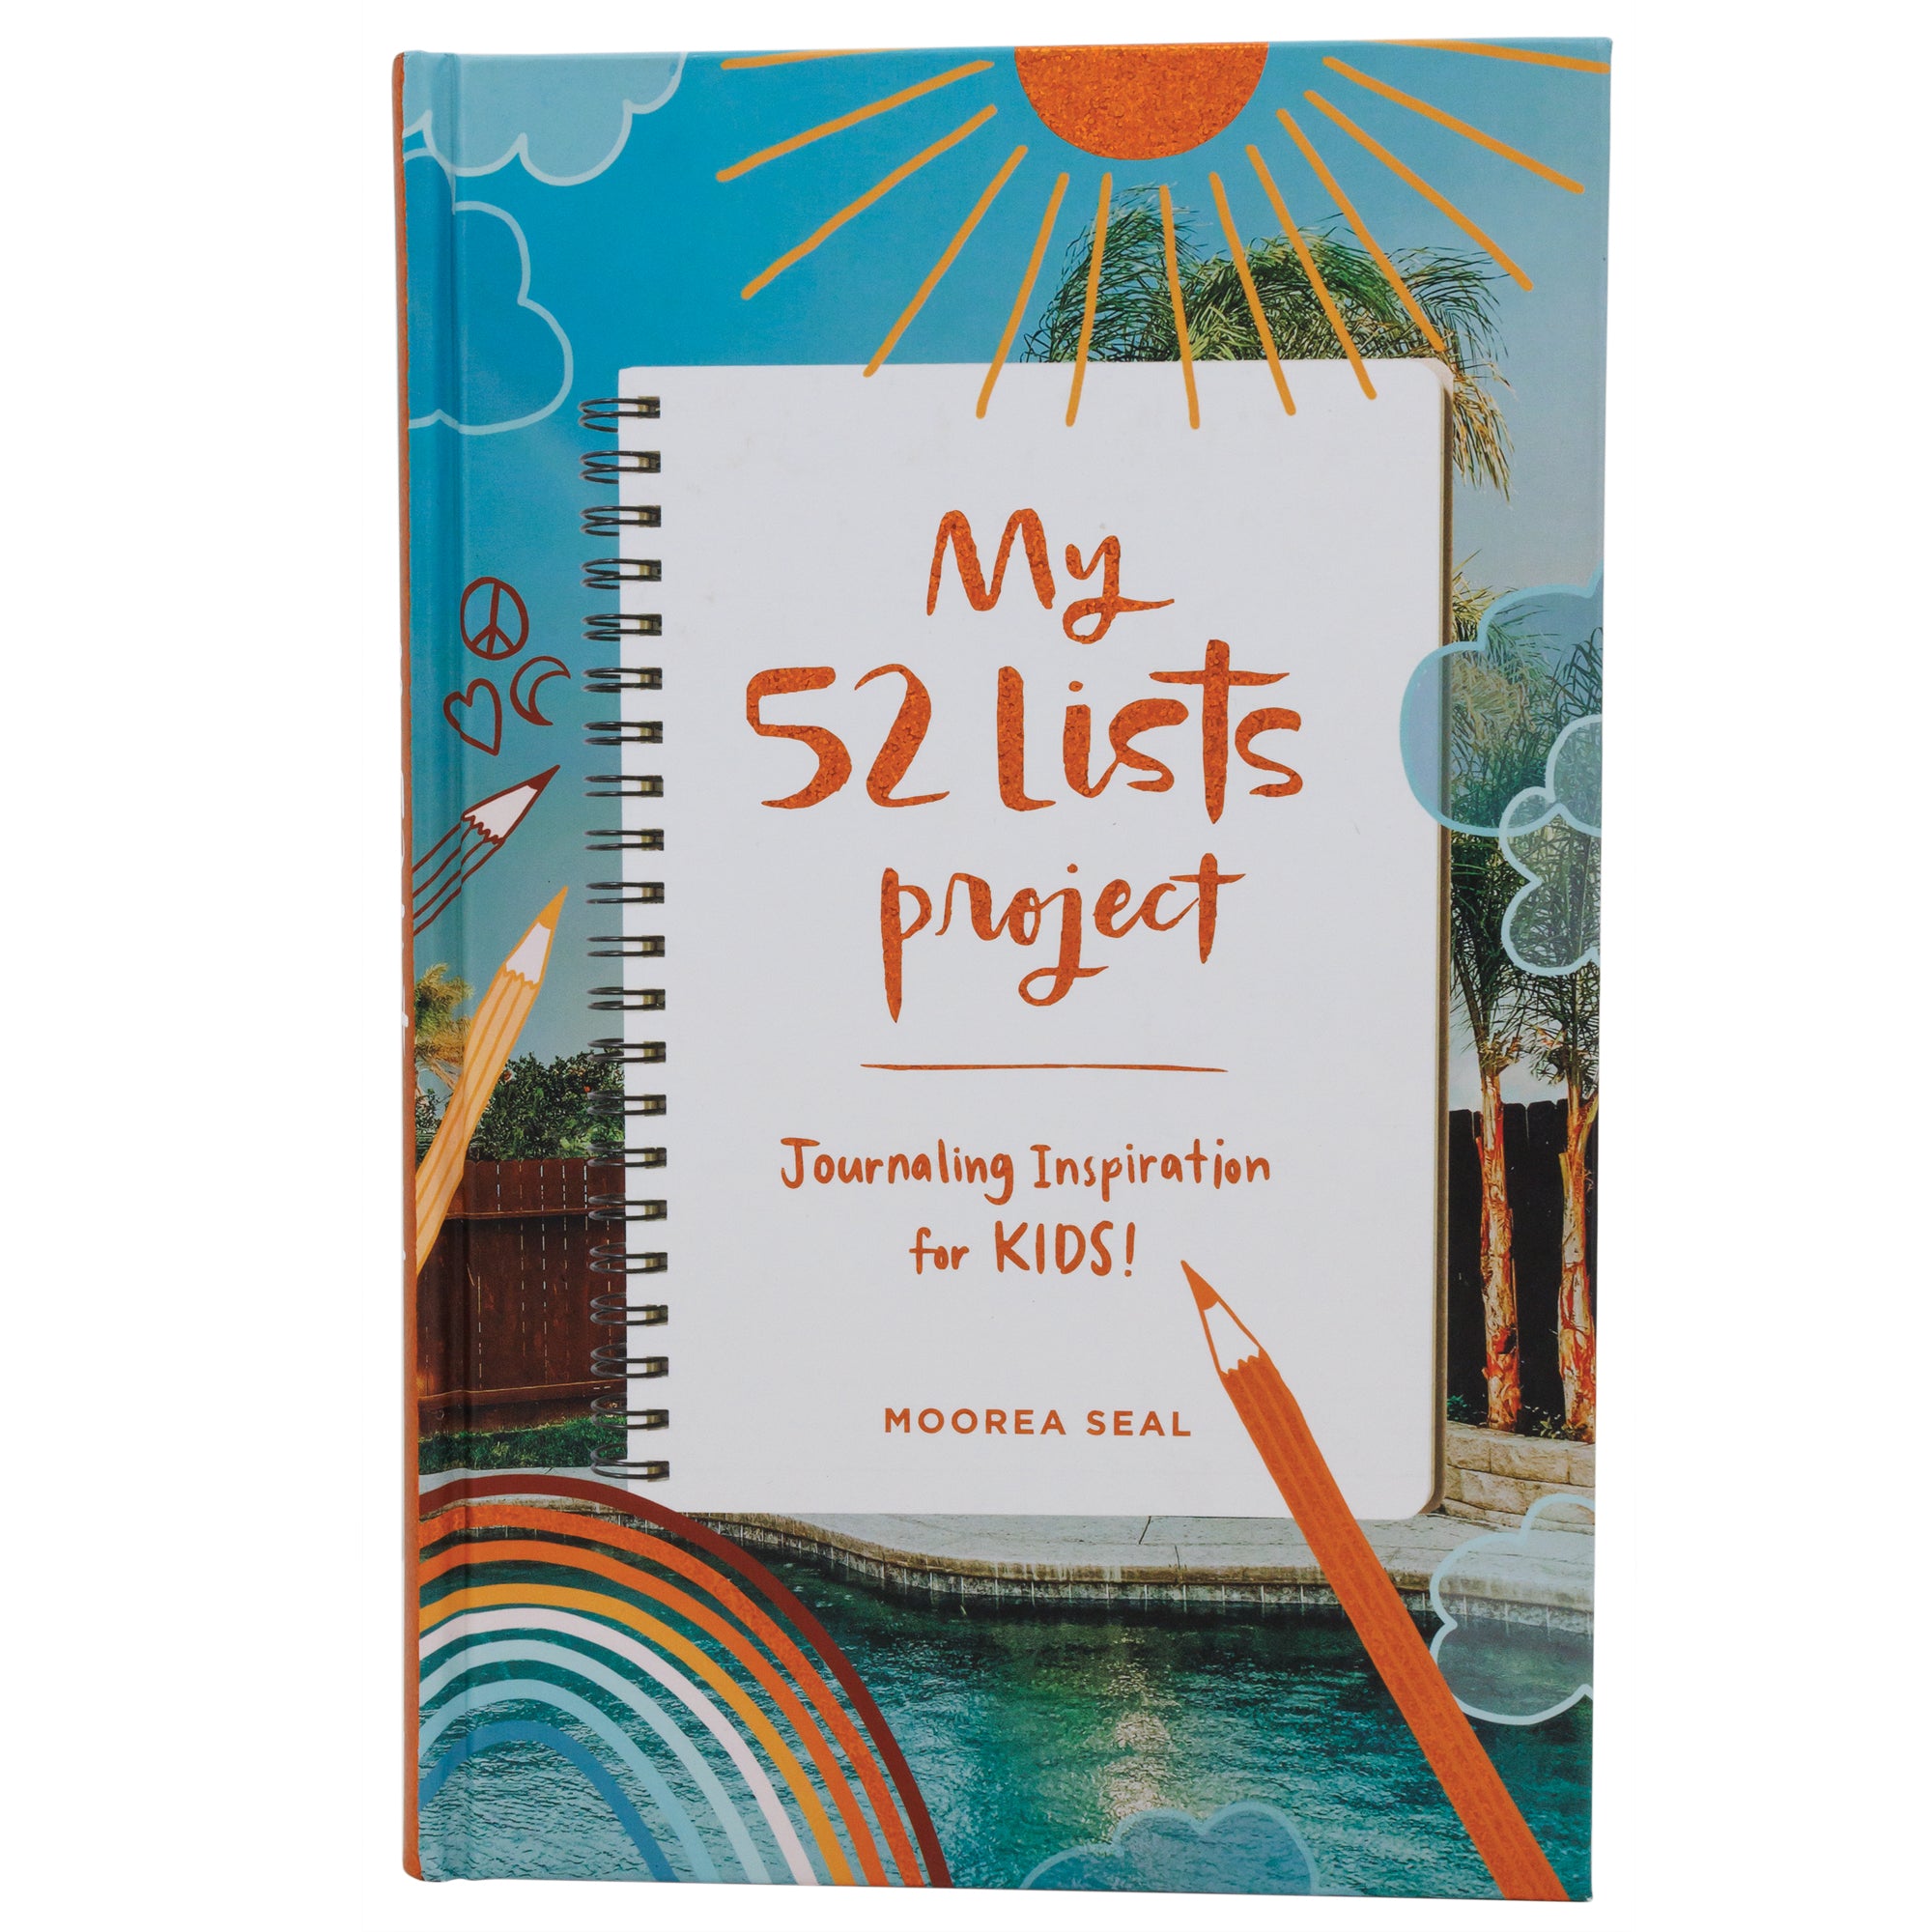 My 52 Lists Project book cover. The background is of a pool with a wood fence and some greenery under a blue sky. There is a white notebook in the middle with the title and text that reads "Journaling Inspiration for Kids." Around the outside are illustrations of colored pencils, a rainbow, clouds, and a sun.